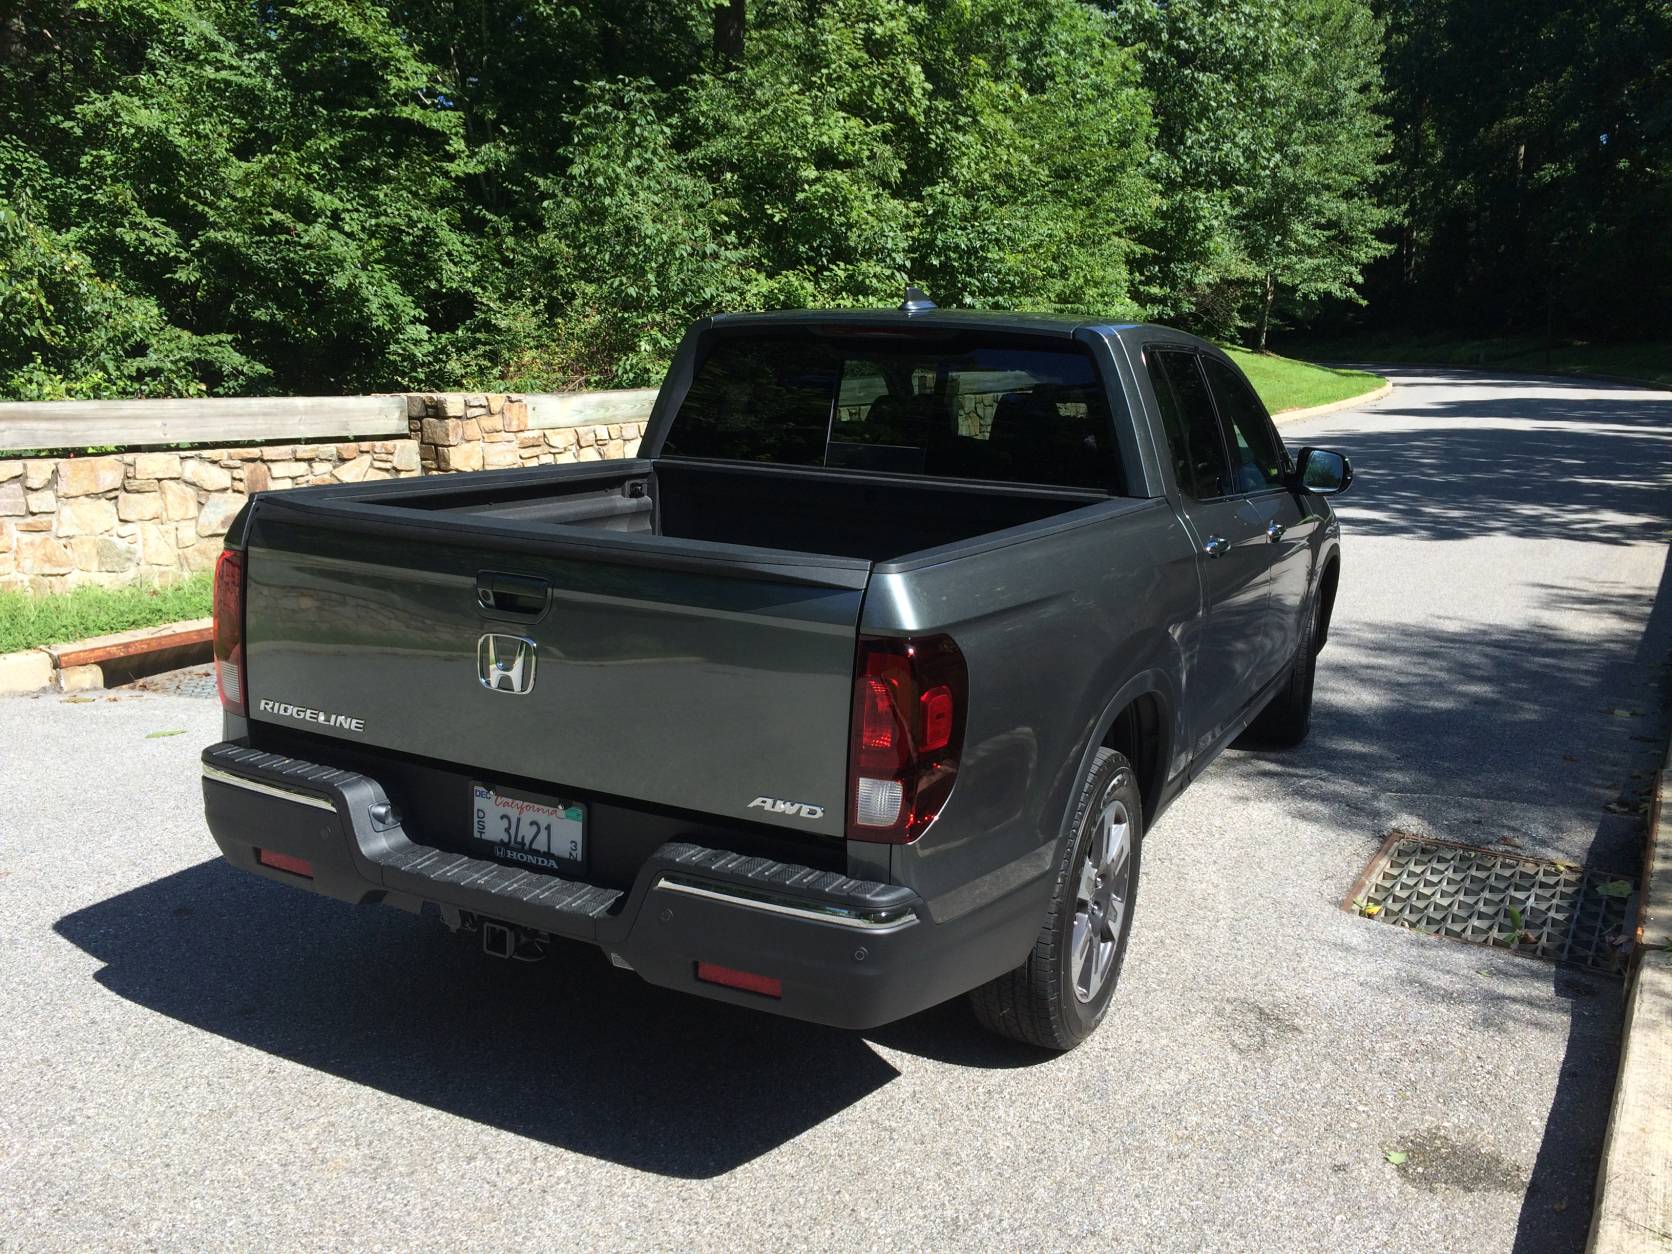 The Ridgeline drives like a crossover so you don’t get any of that bounce feeling over bumps with an empty bed. (WTOP/Mike Parris)